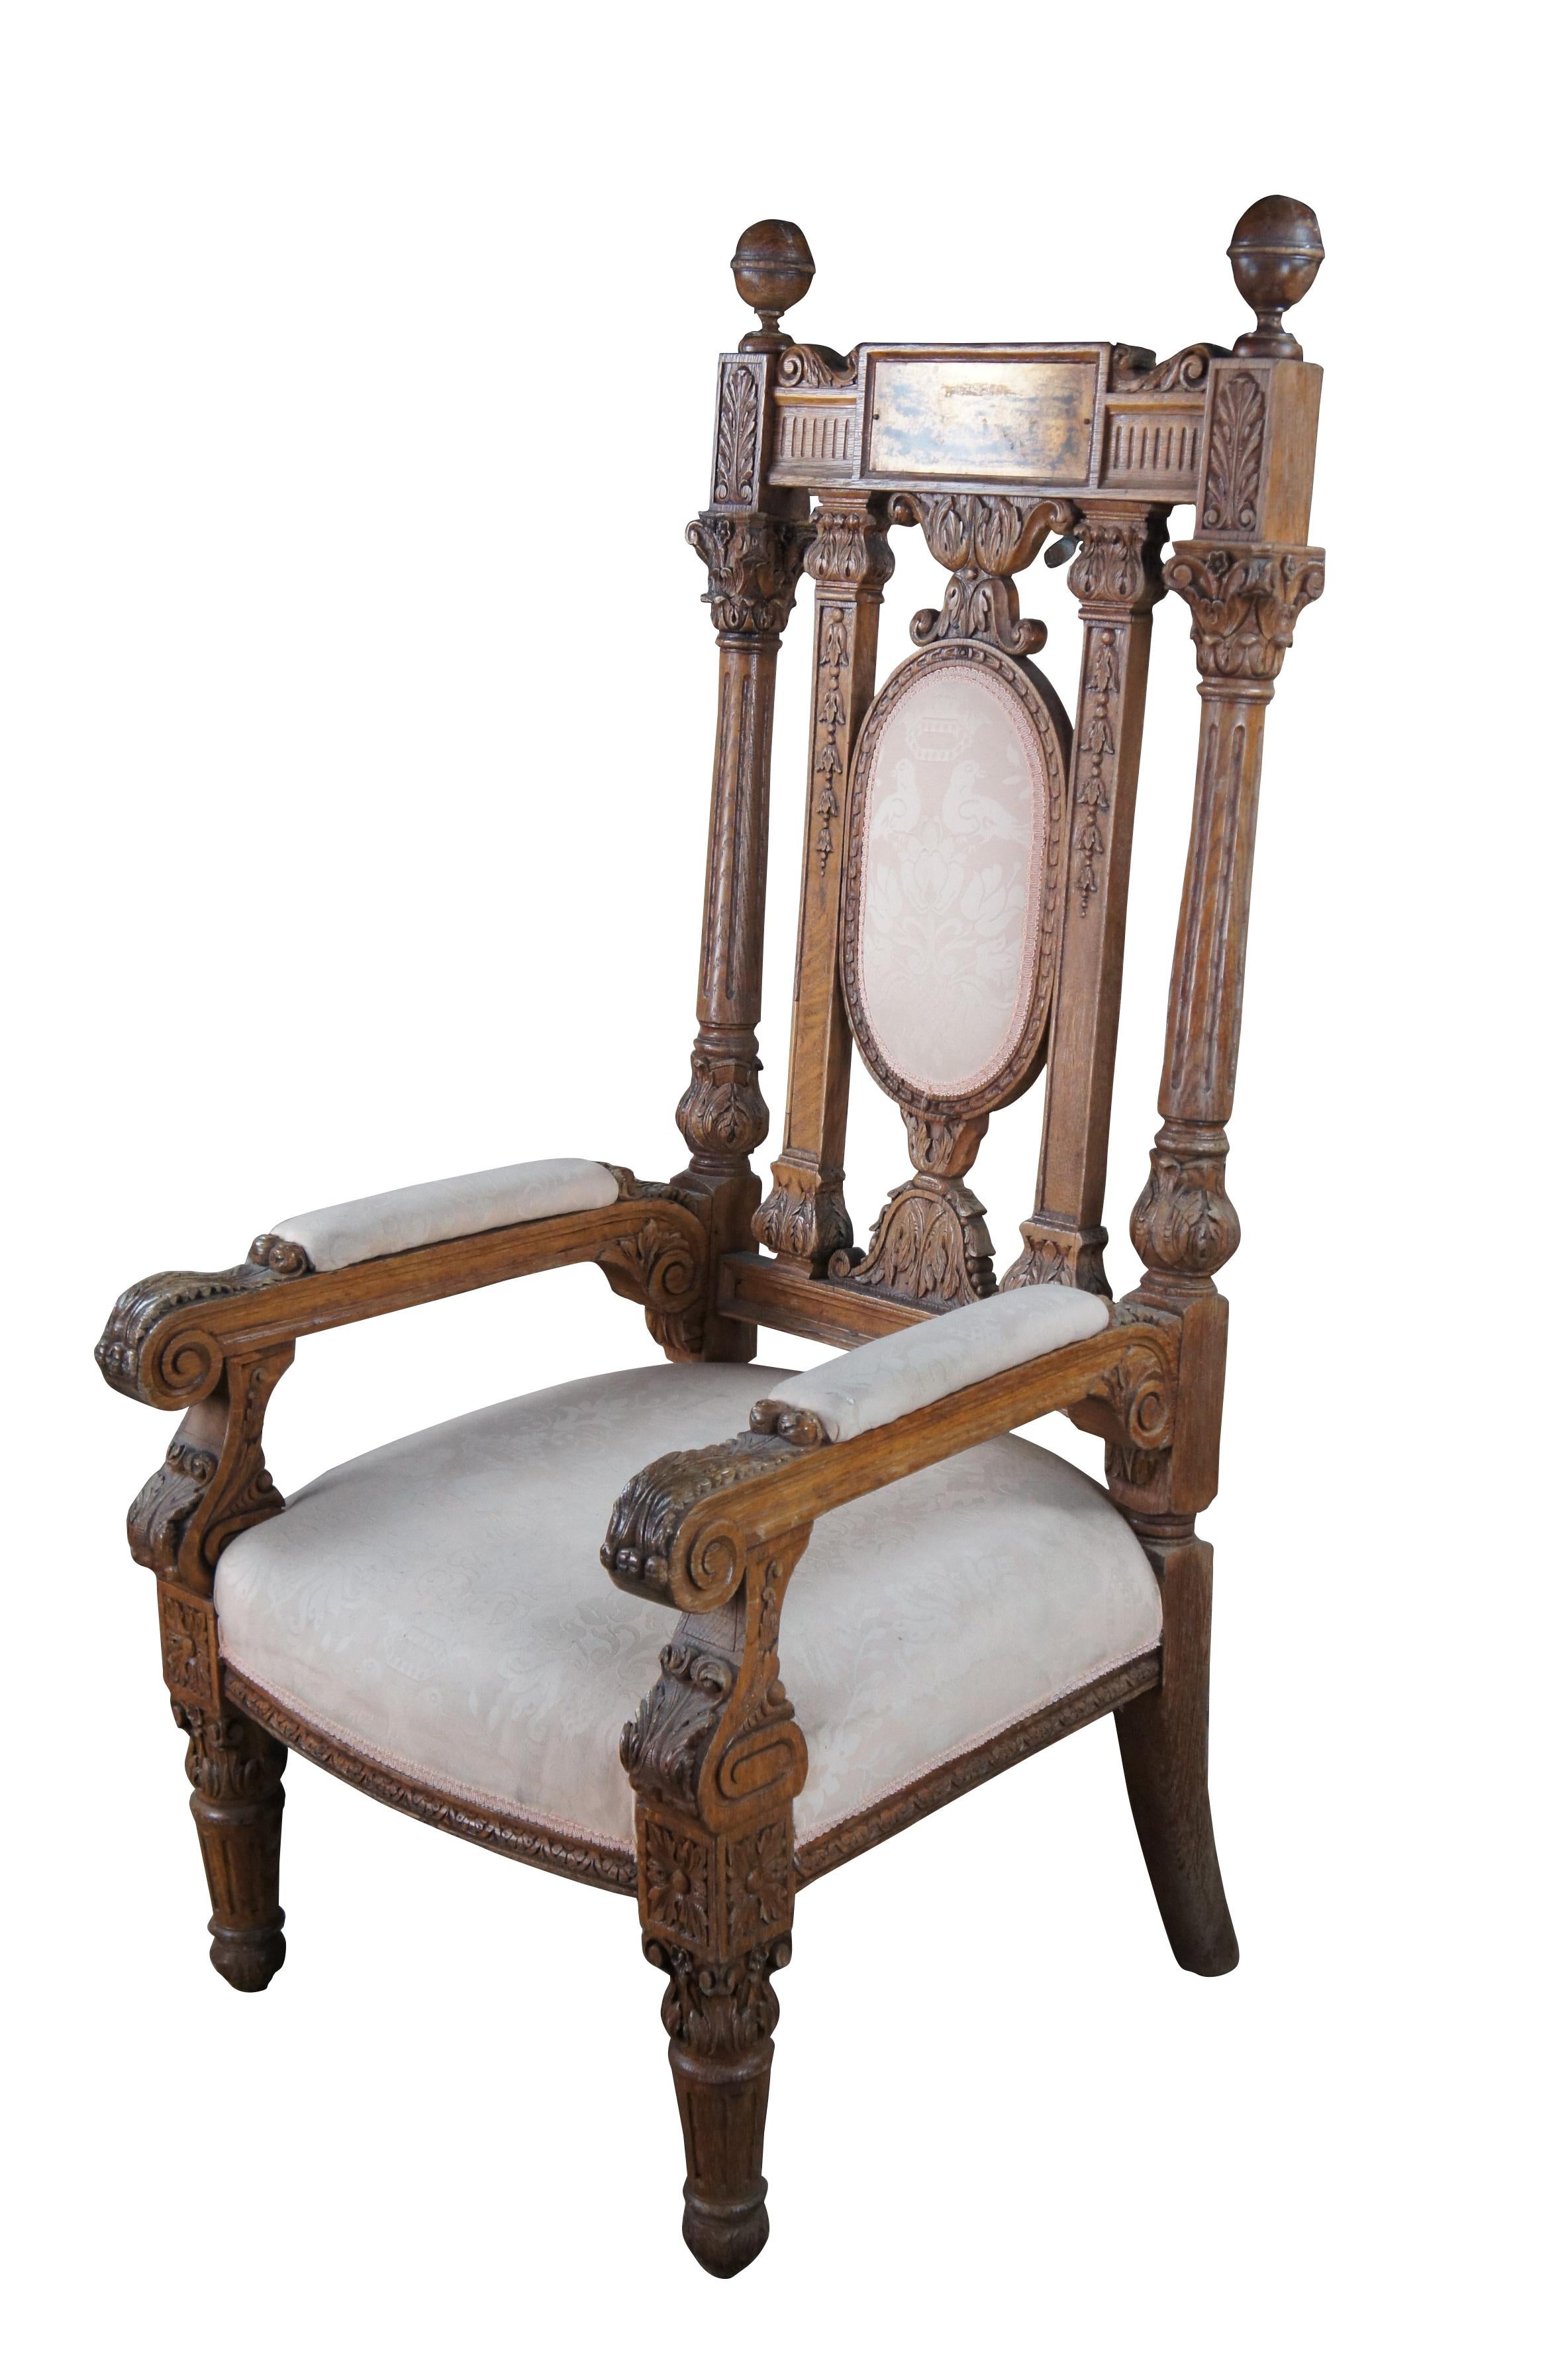 Monumental antique Victorian throne armchair.  Made of oak featuring ornate reticulated design with highly carved foliate / floral motif throughout.  The crest features large turned finials that flank a brass name plaque which sits above fluted